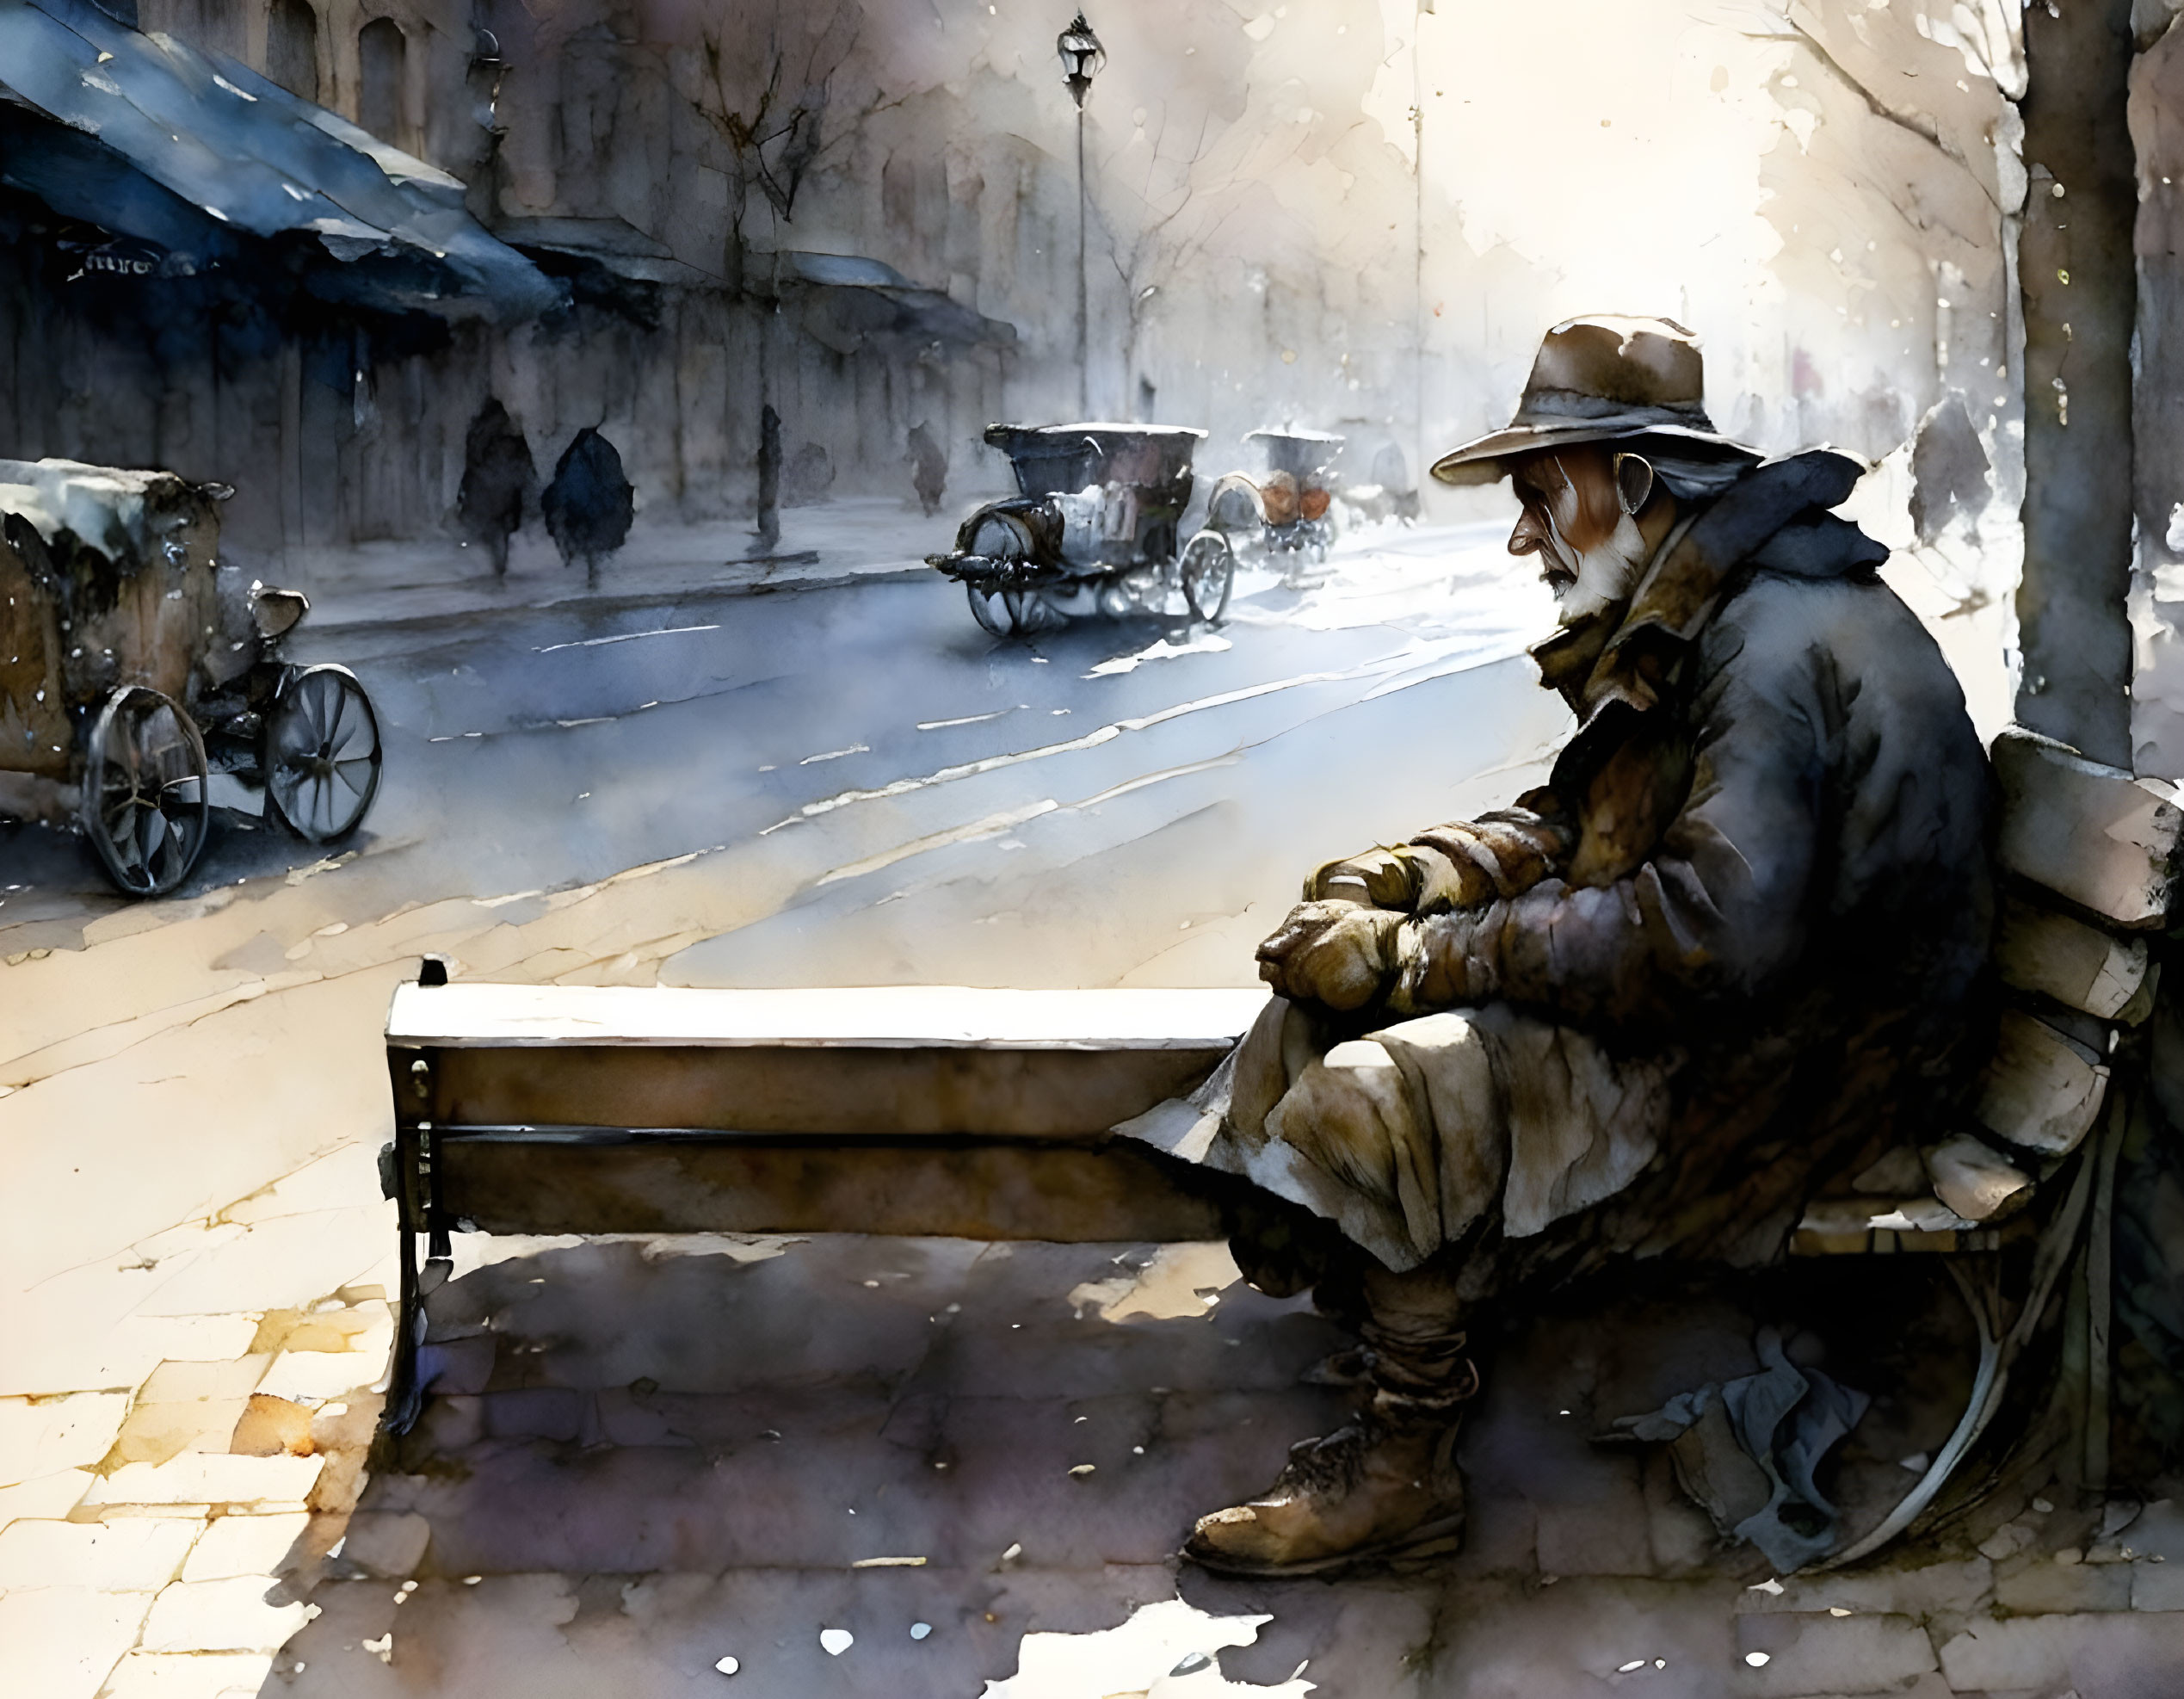 Solitary figure in hat and coat on bench in vintage street watercolor.